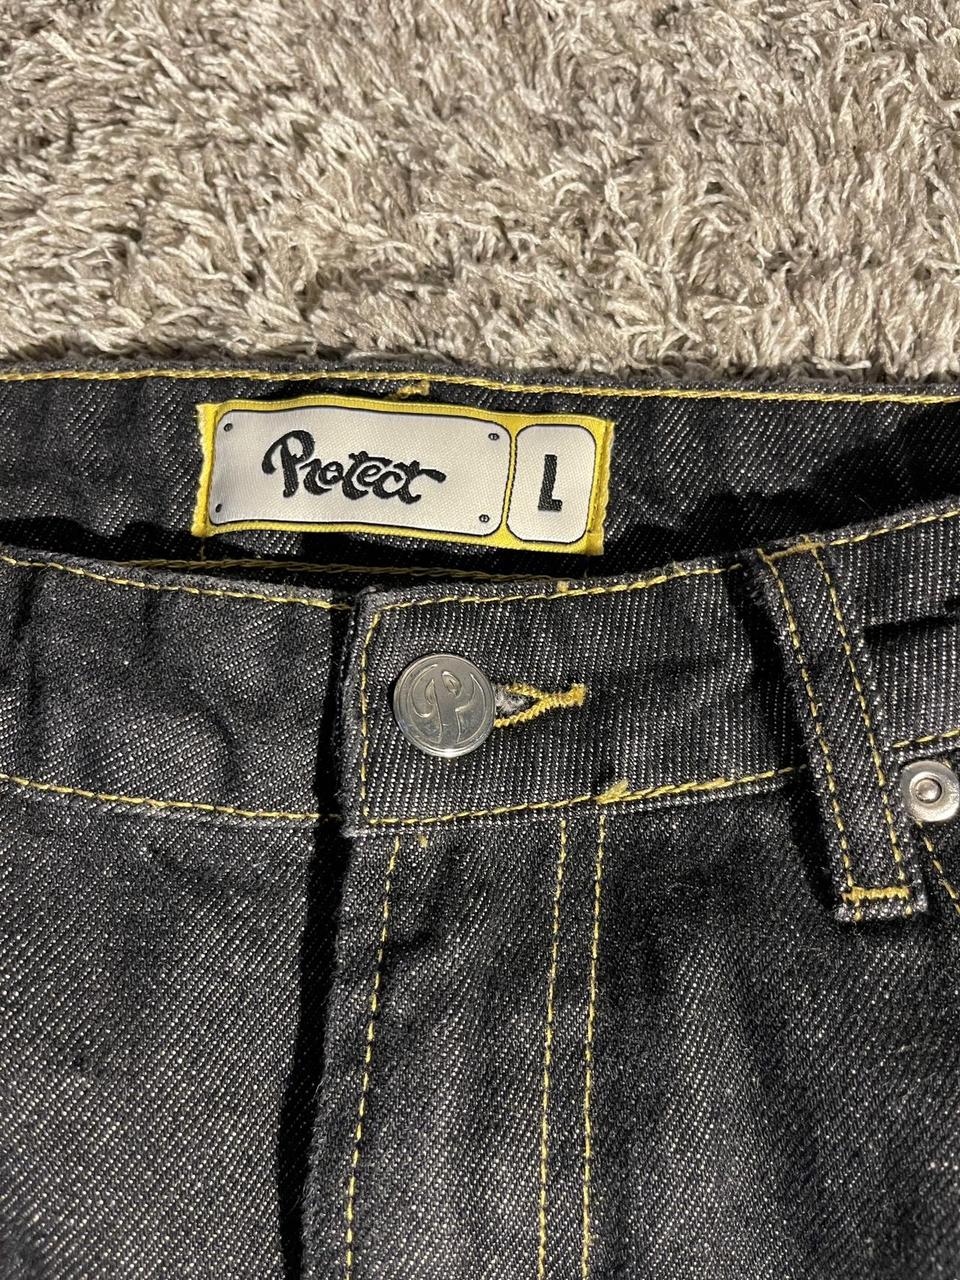 Protect London jeans size small awesome jeans - Depop